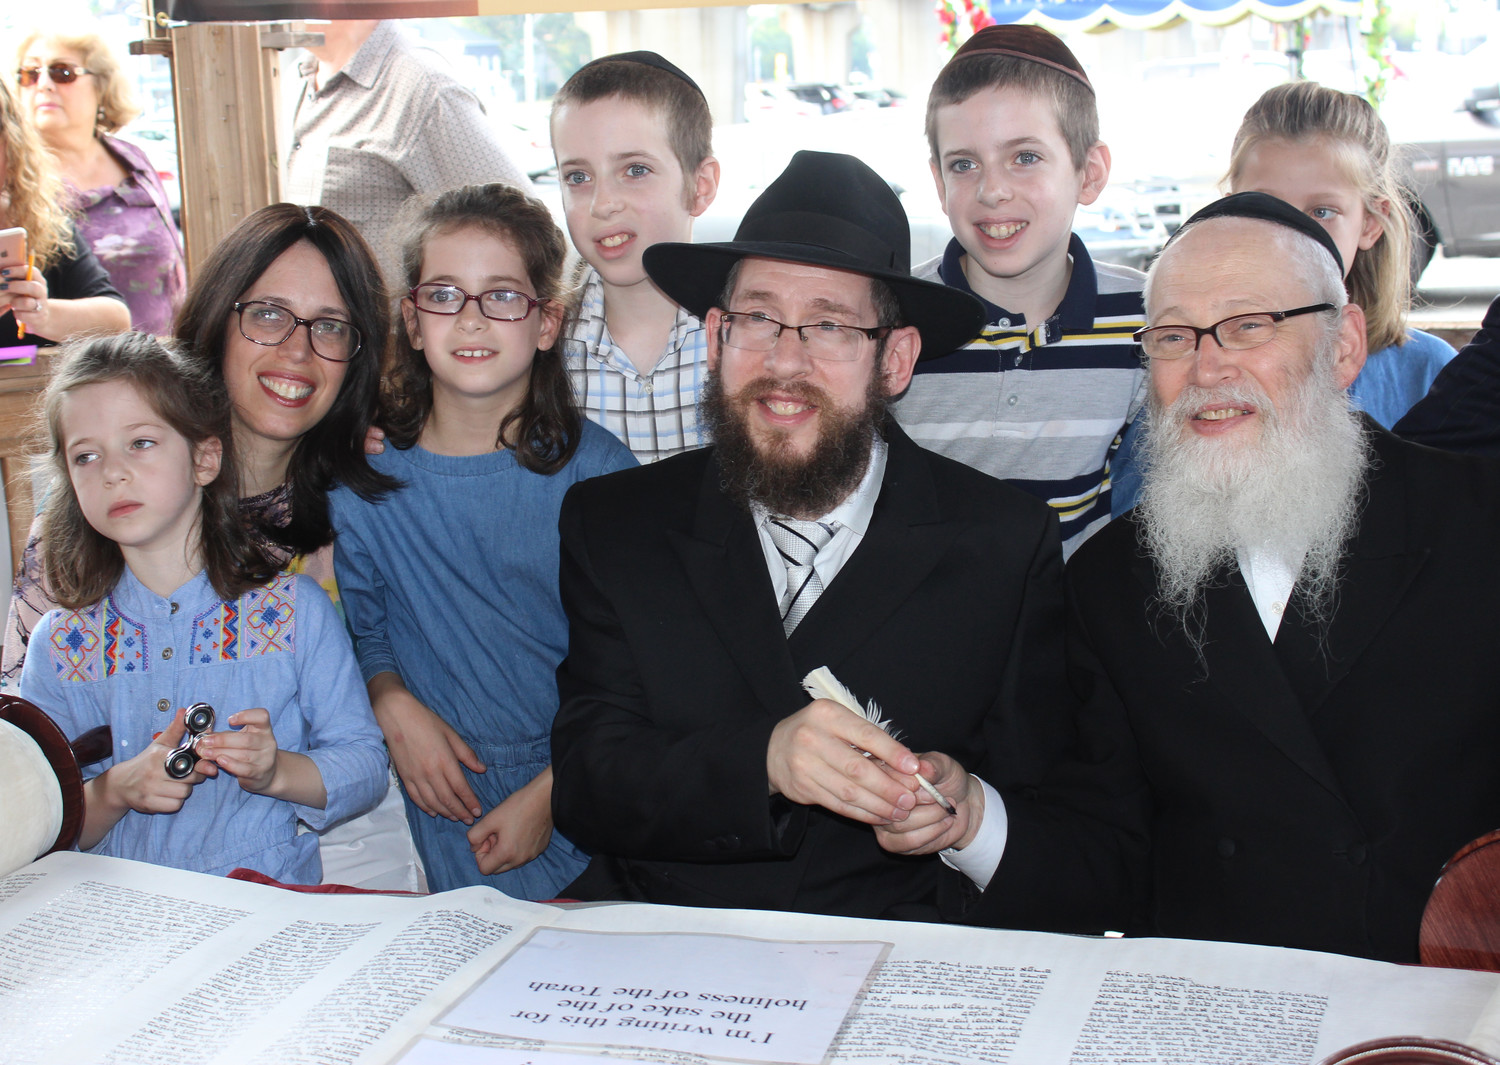 The Chabad Center finished drafting its new Torah scroll in the Merrick train station gazebo on Sept. 17. Above, from right, were Rabbi Moshe Klein, the Torah’s scribe; Kramer; his wife, Chanie; and their children, from left, Leah, 6, Mirel, 8, Binyamin, Leibel, and Sarah, 8.